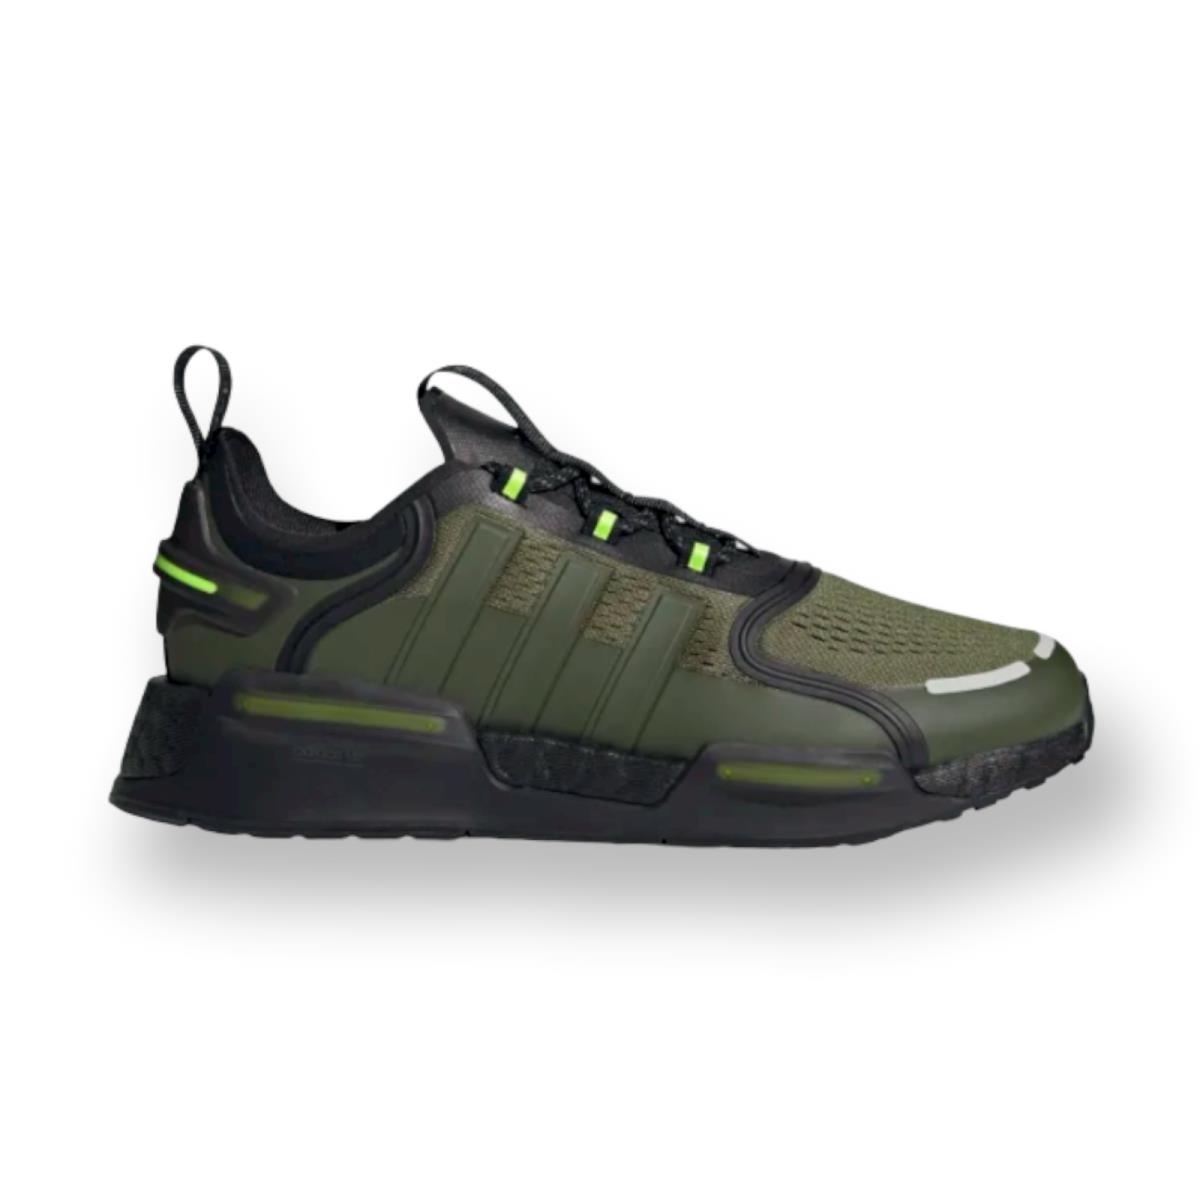 Adidas Nmd V3 Originals Shoes Sneakers HQ3970 Focus Olive Men`s Size 10